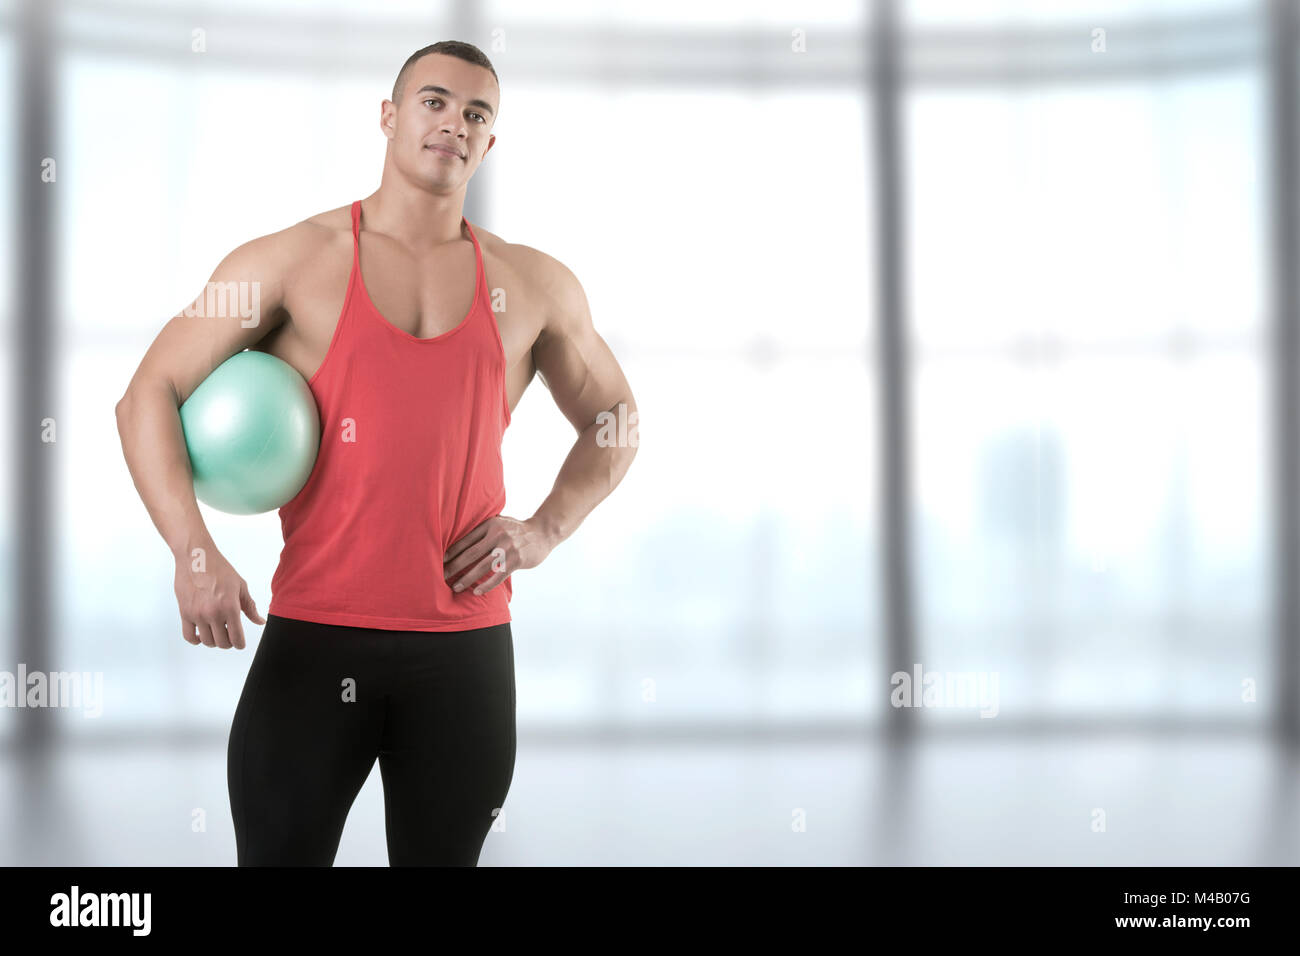 Fit Man Standing Holding a Pilates Ball Stock Photo